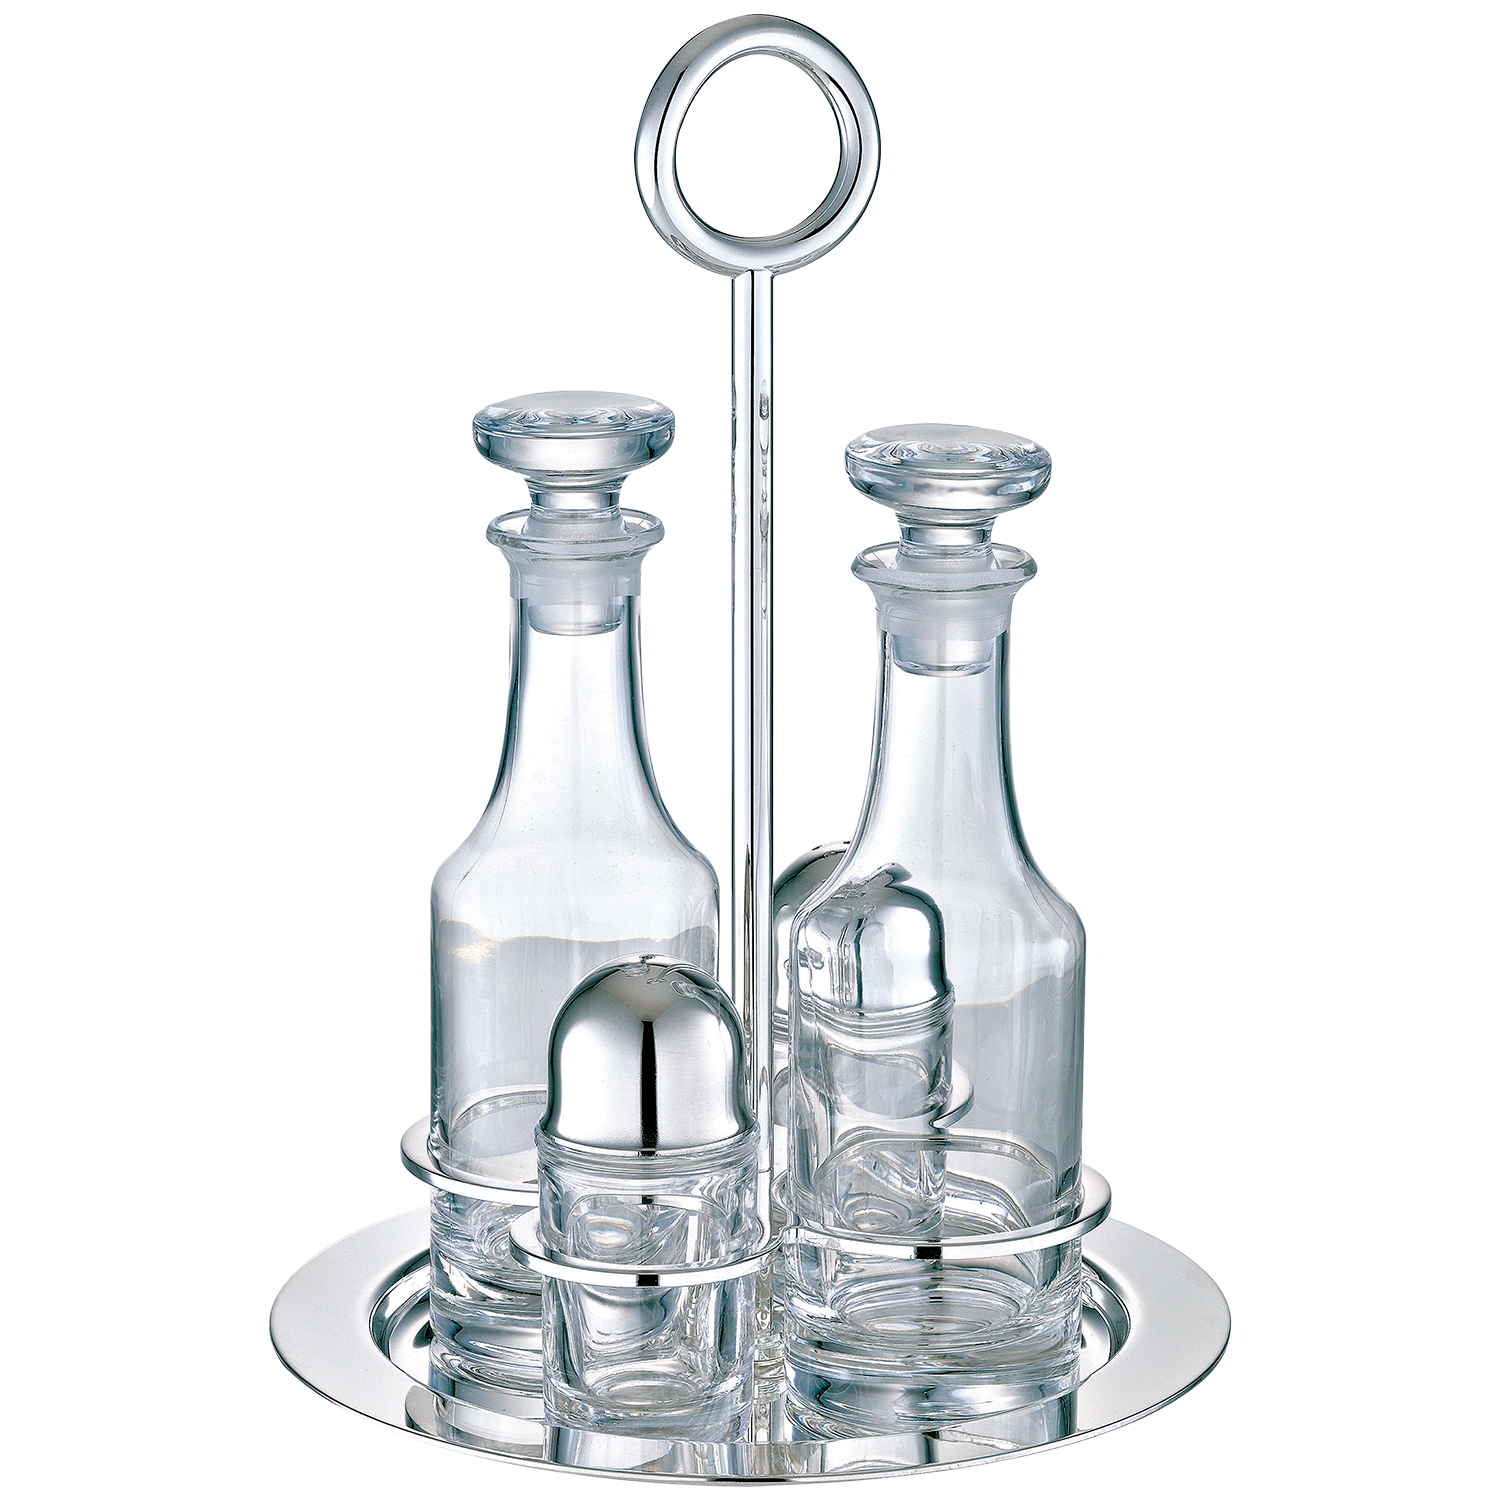 Silver-Plated oil and vinegar cruet set with stand